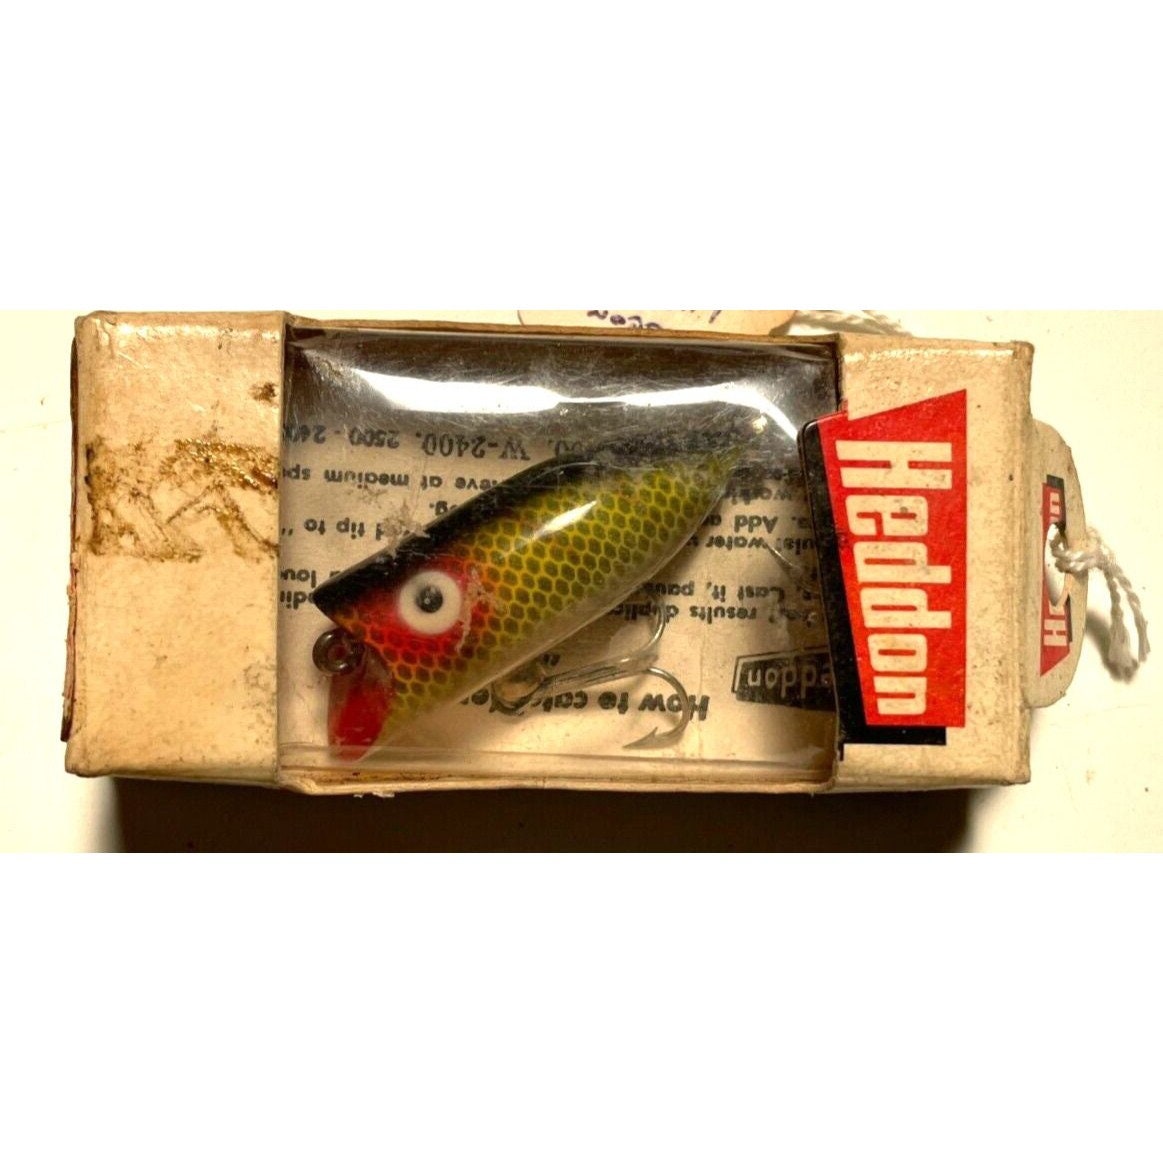 Heddon TINY Lucky 13 Vintage Fishing Lure W/box,papers New G 